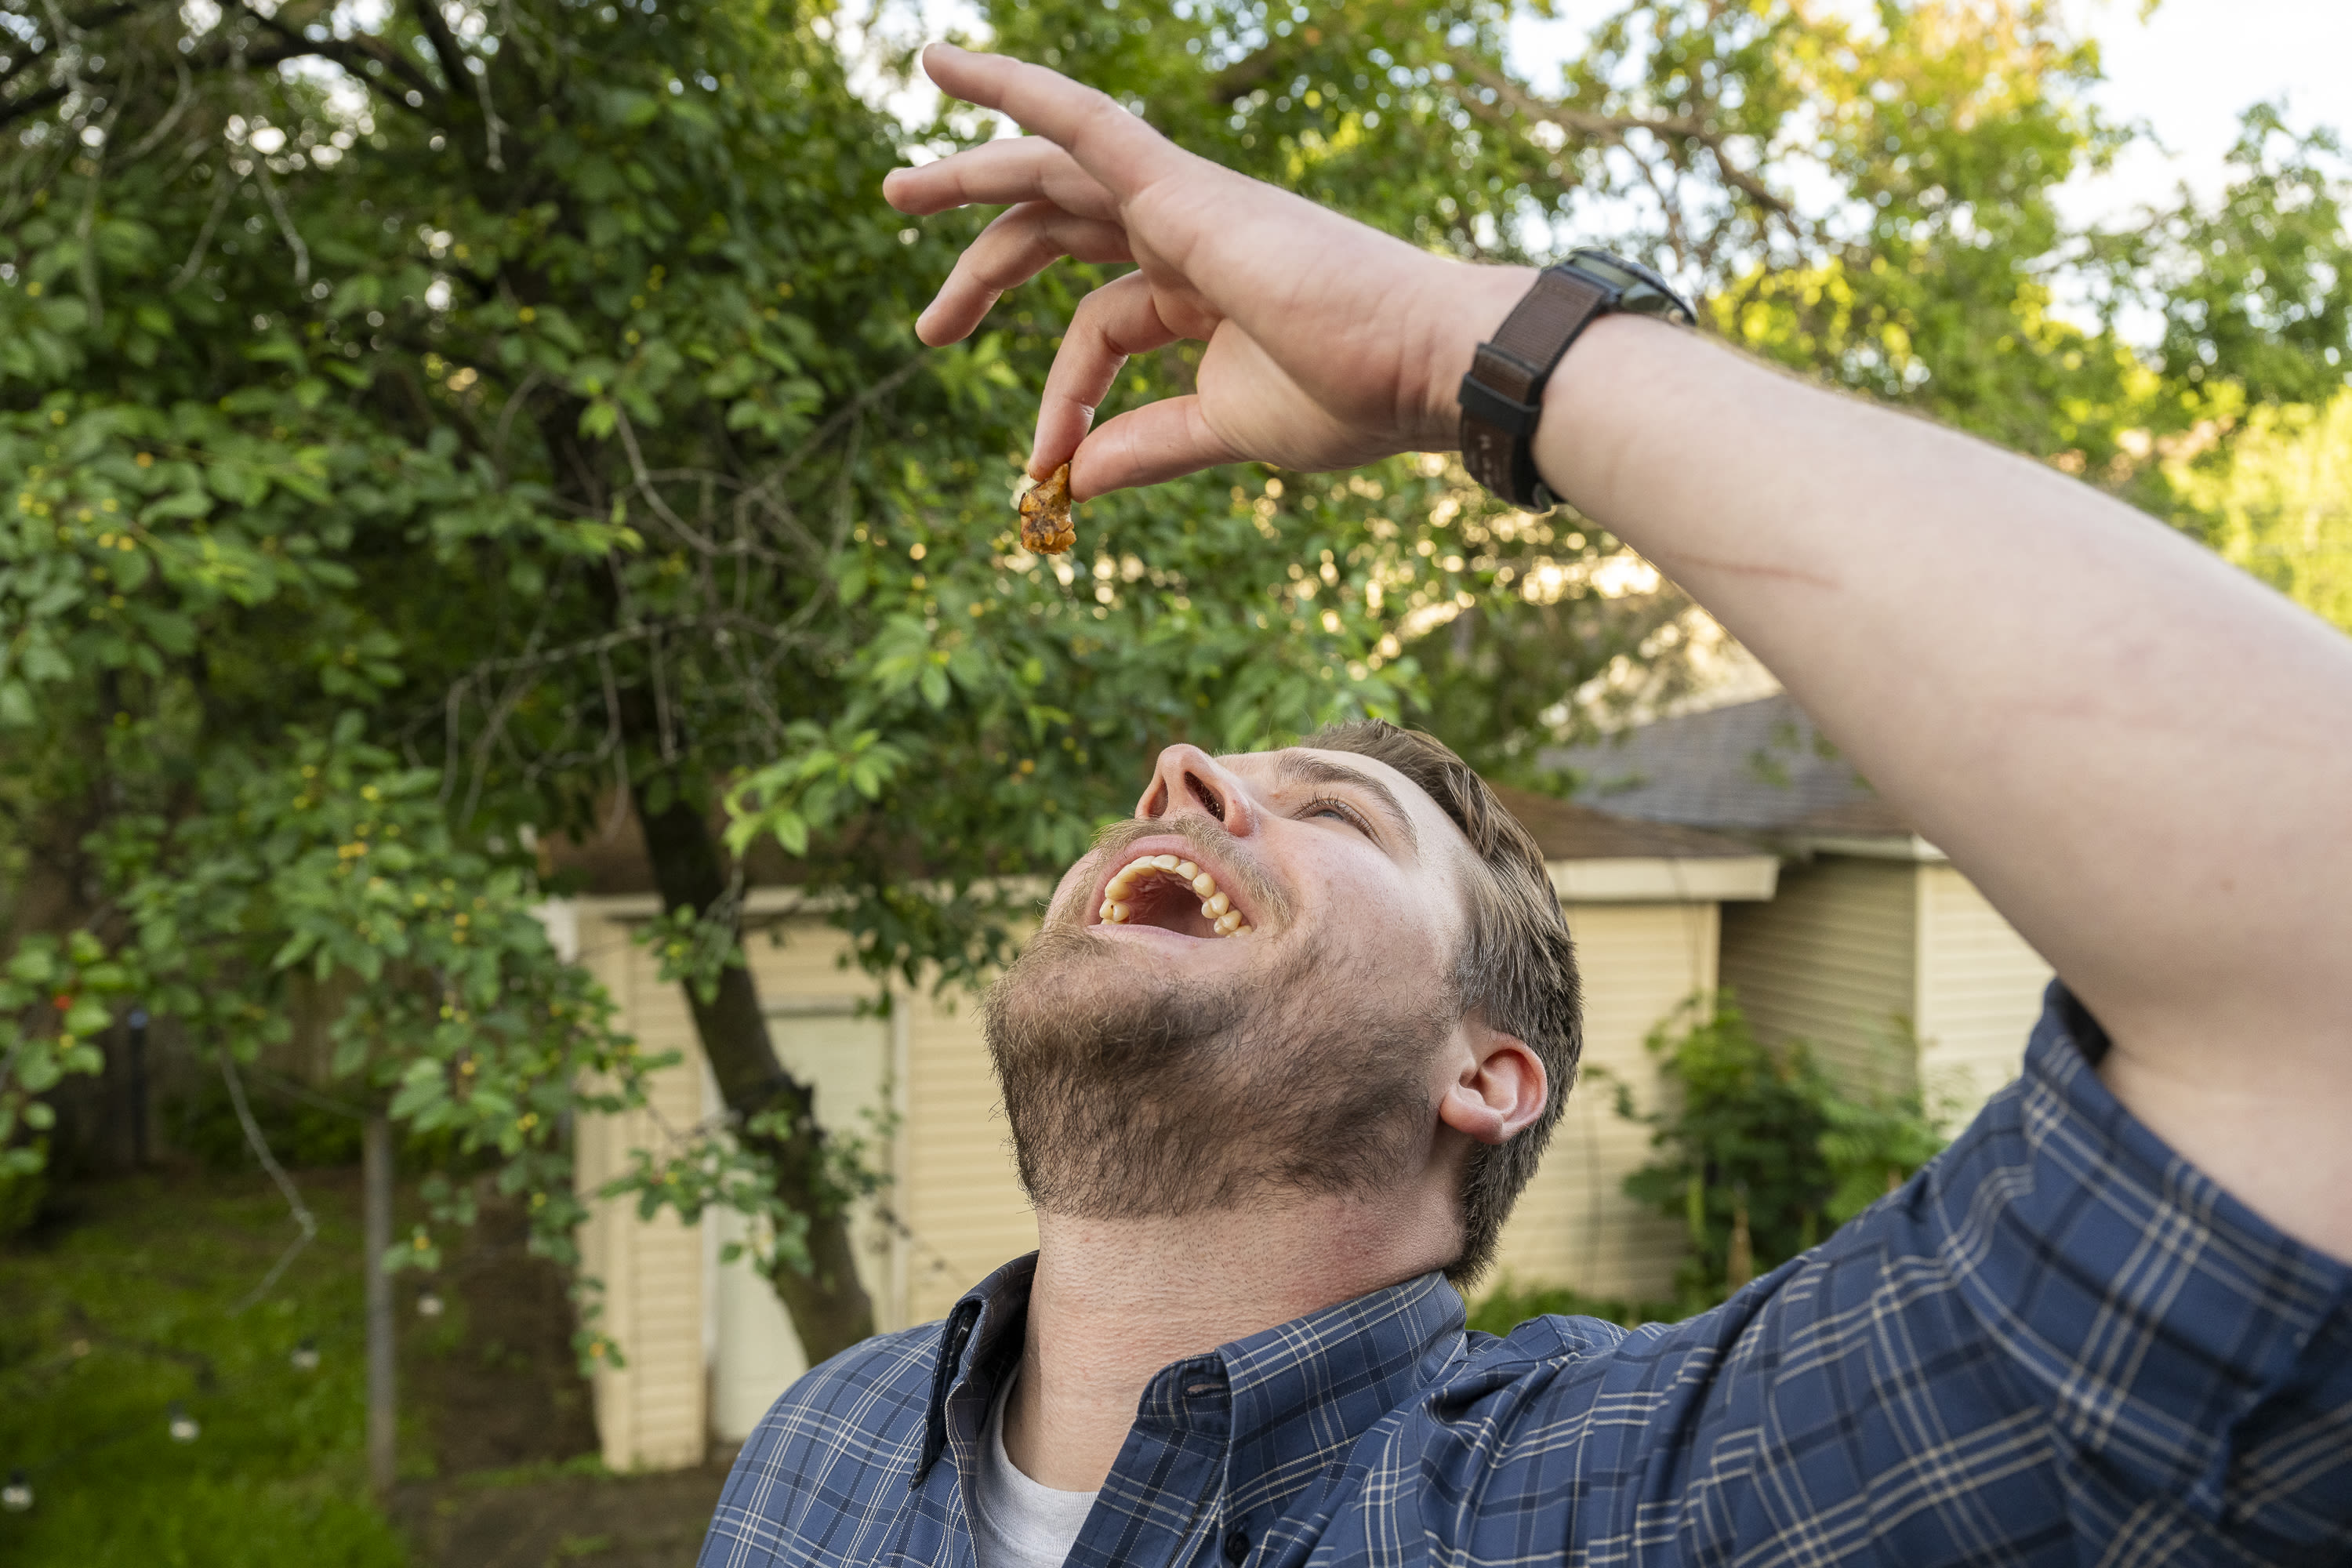 Locals indulge in cicada snacks — available every 17 years